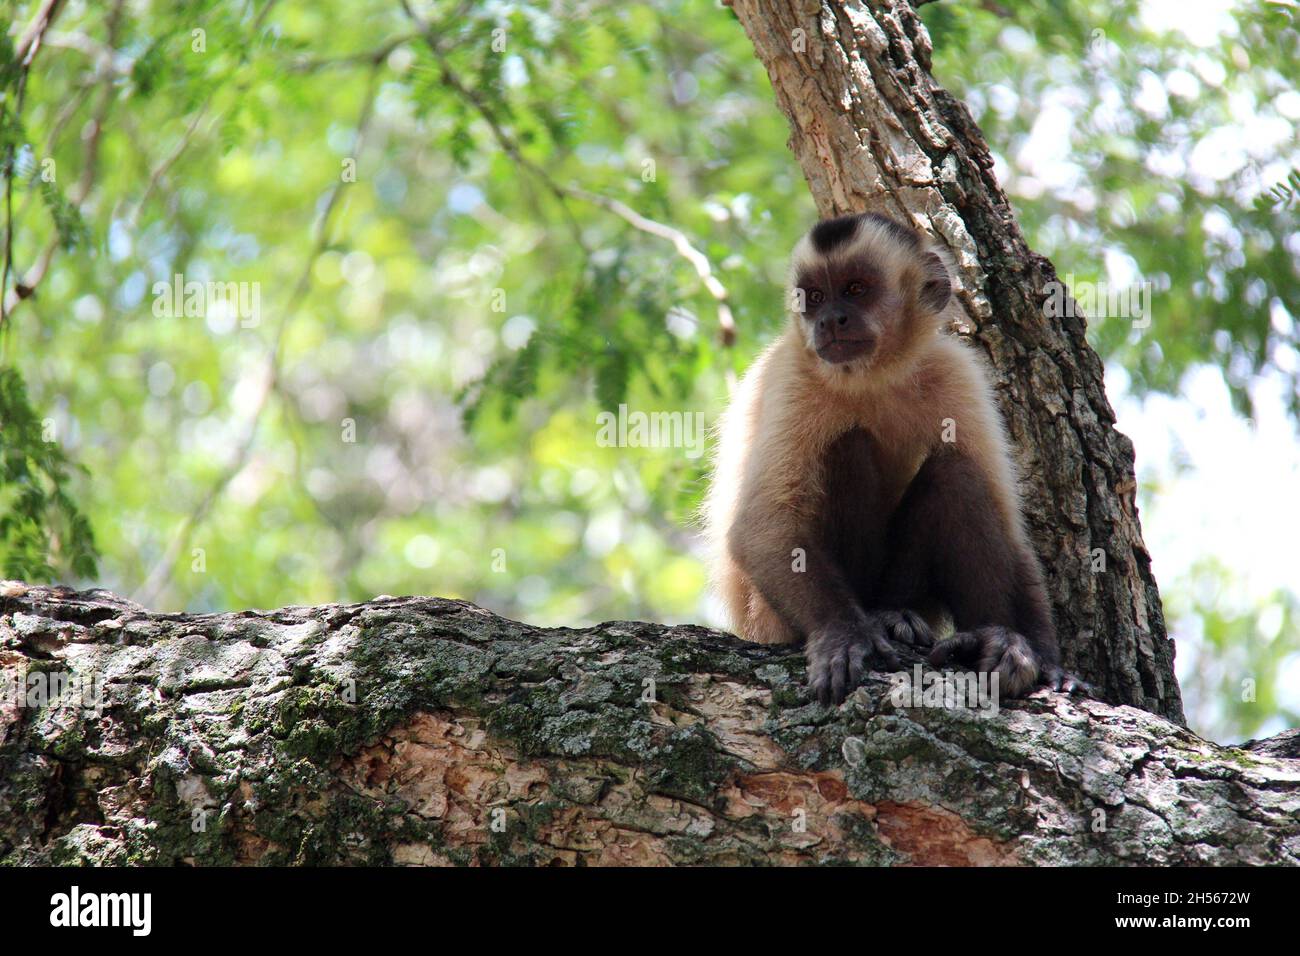 Monkey sitting on a tree trunk, with blurred background. Bonito - Mato Grosso do Sul - Brazil. Stock Photo